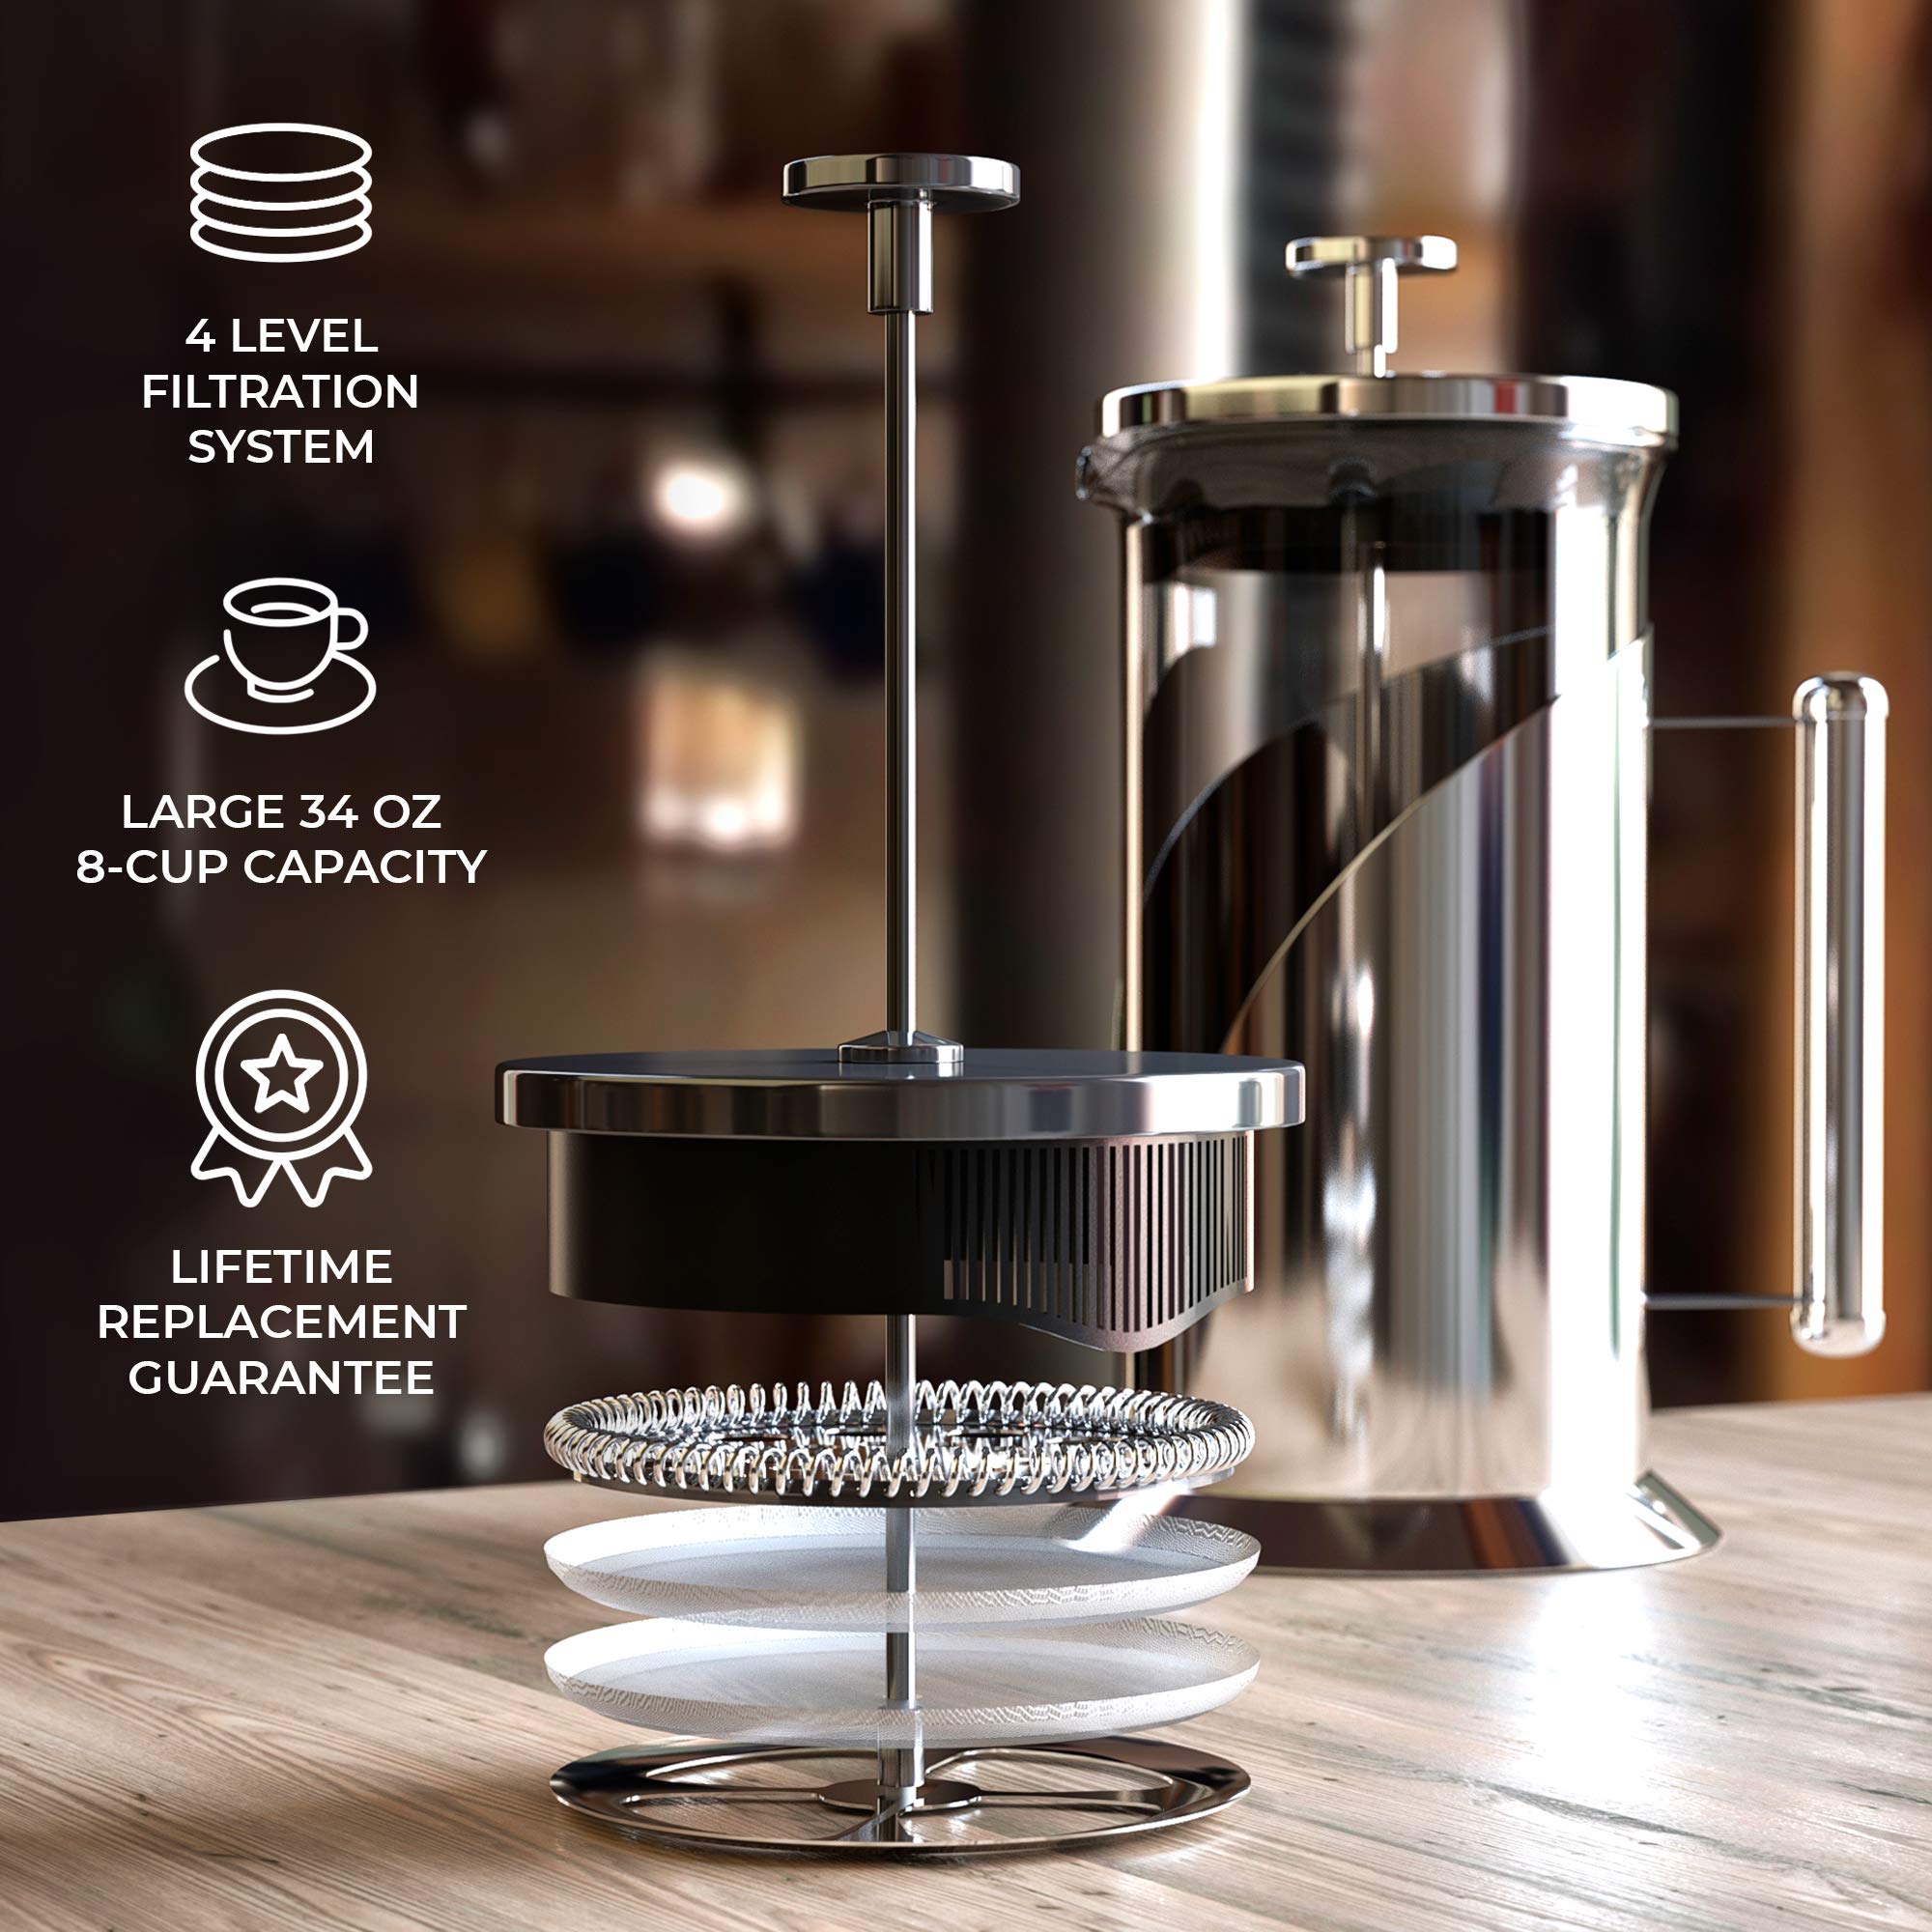 Cafe Du Chateau French Press Coffee Maker, Brews Coffee and Tea, Heat  Resistant Glass with 4 Level Filtration System, Stainless Steel Housing,  Large